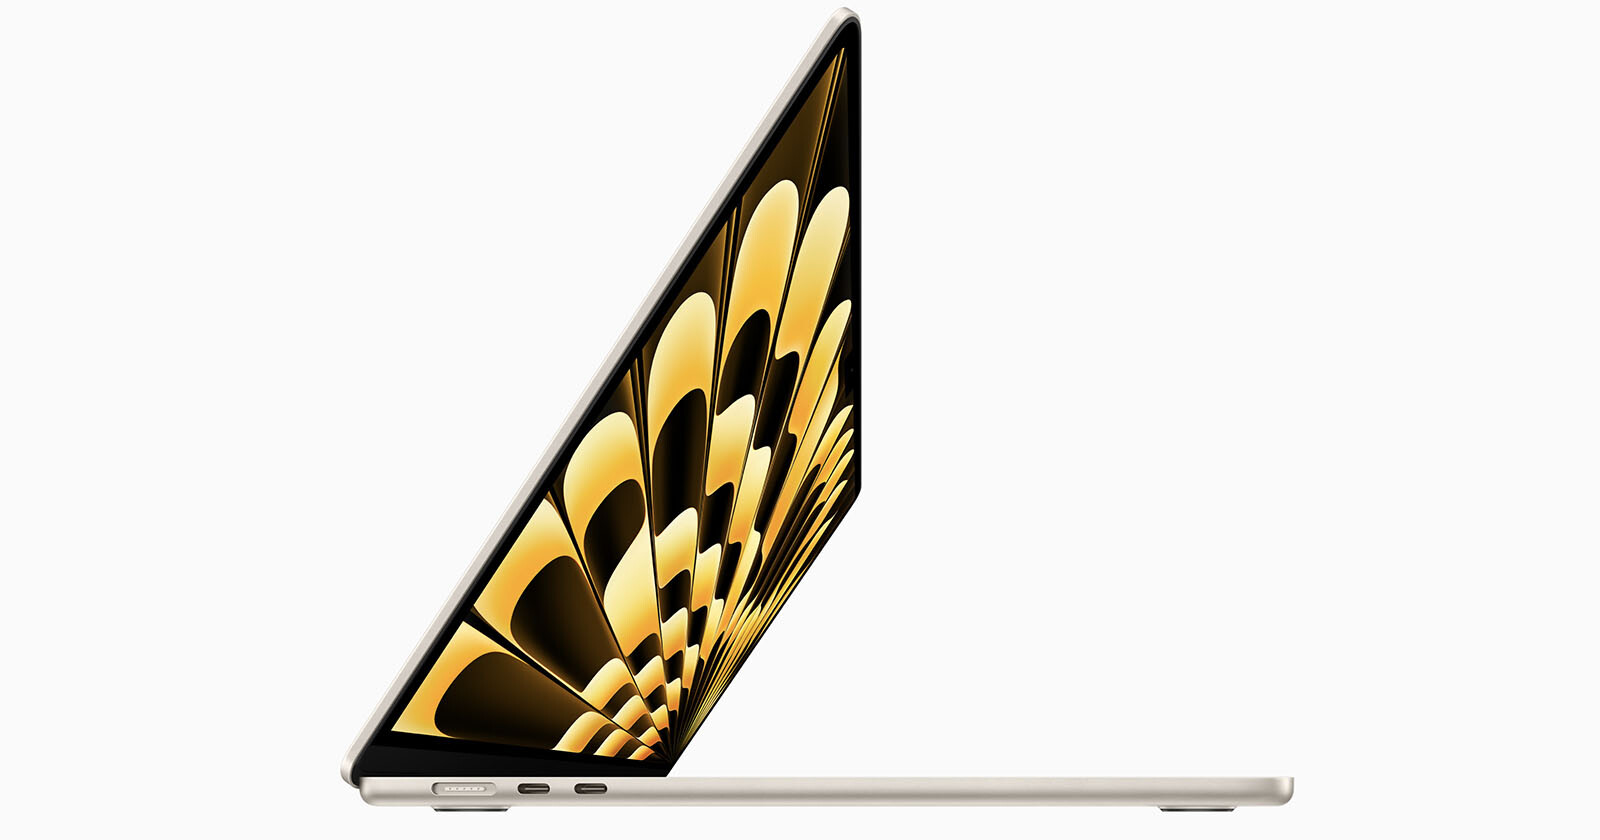 Apples New 15-inch MacBook Air is the Worlds Thinnest 15-inch Laptop